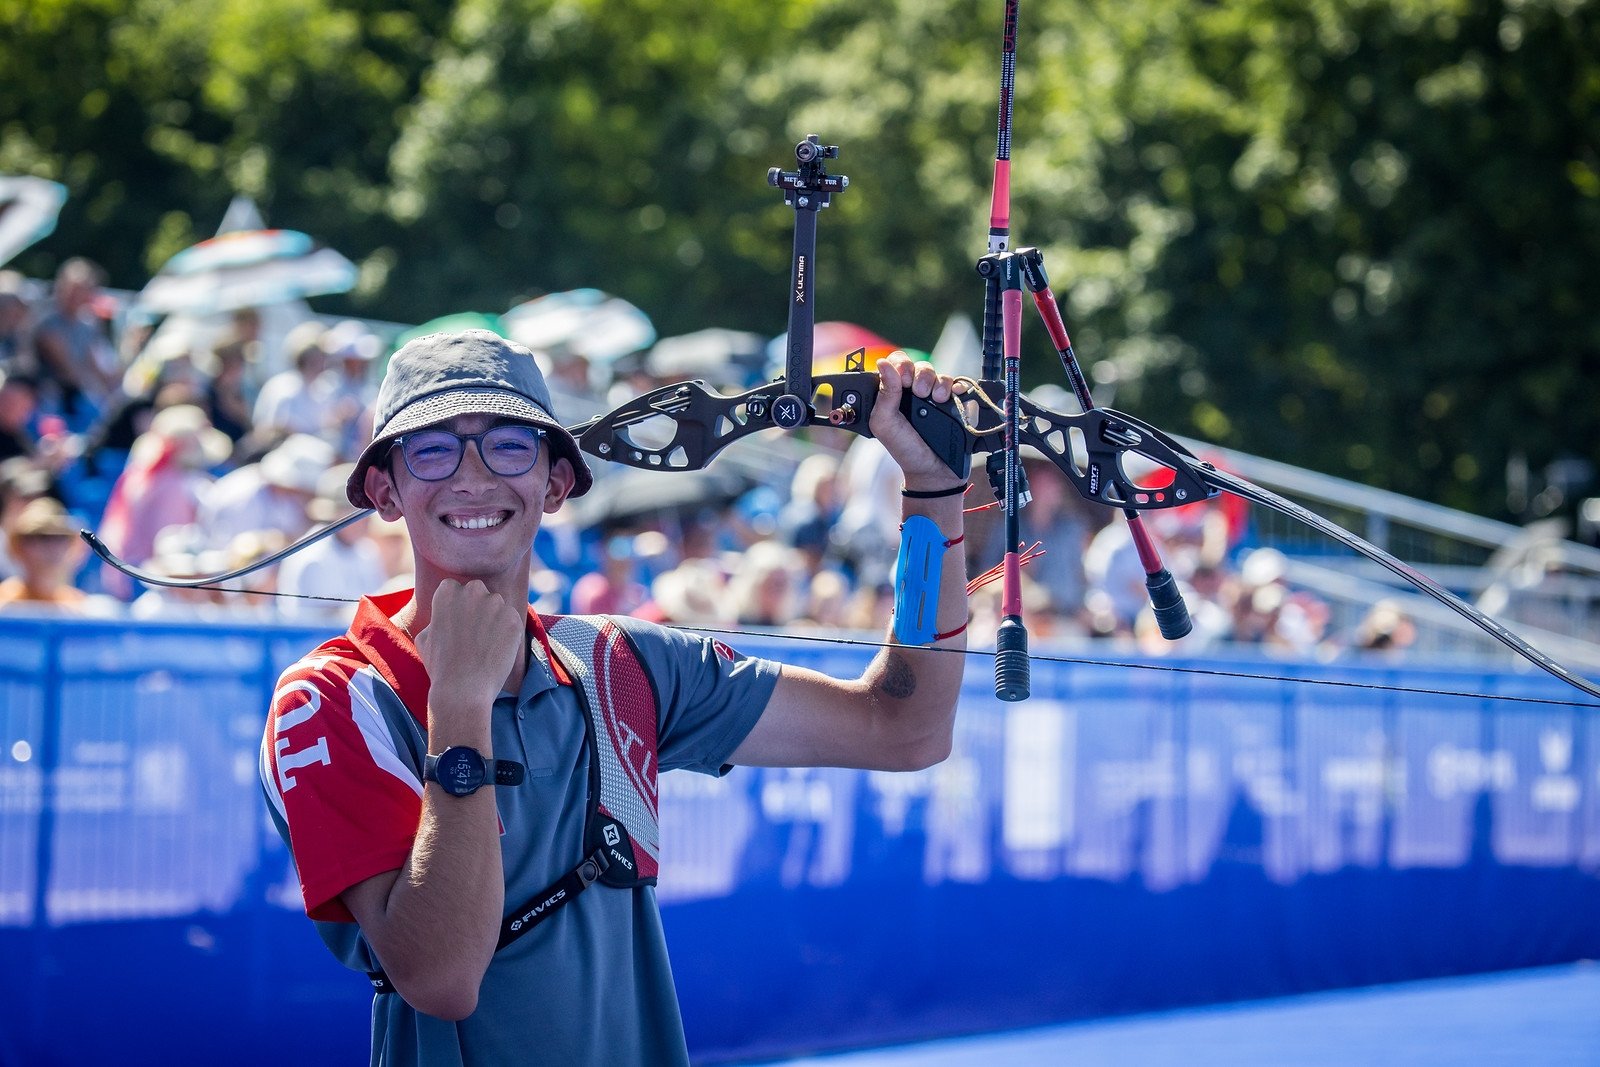 Turkey's Olympic gold medalist Mete Gazoz reacts during the men's recurve bow event at the 2022 European Archery Championships, June 11, Munich, Germany.  (Archeryeurope.org Photo)